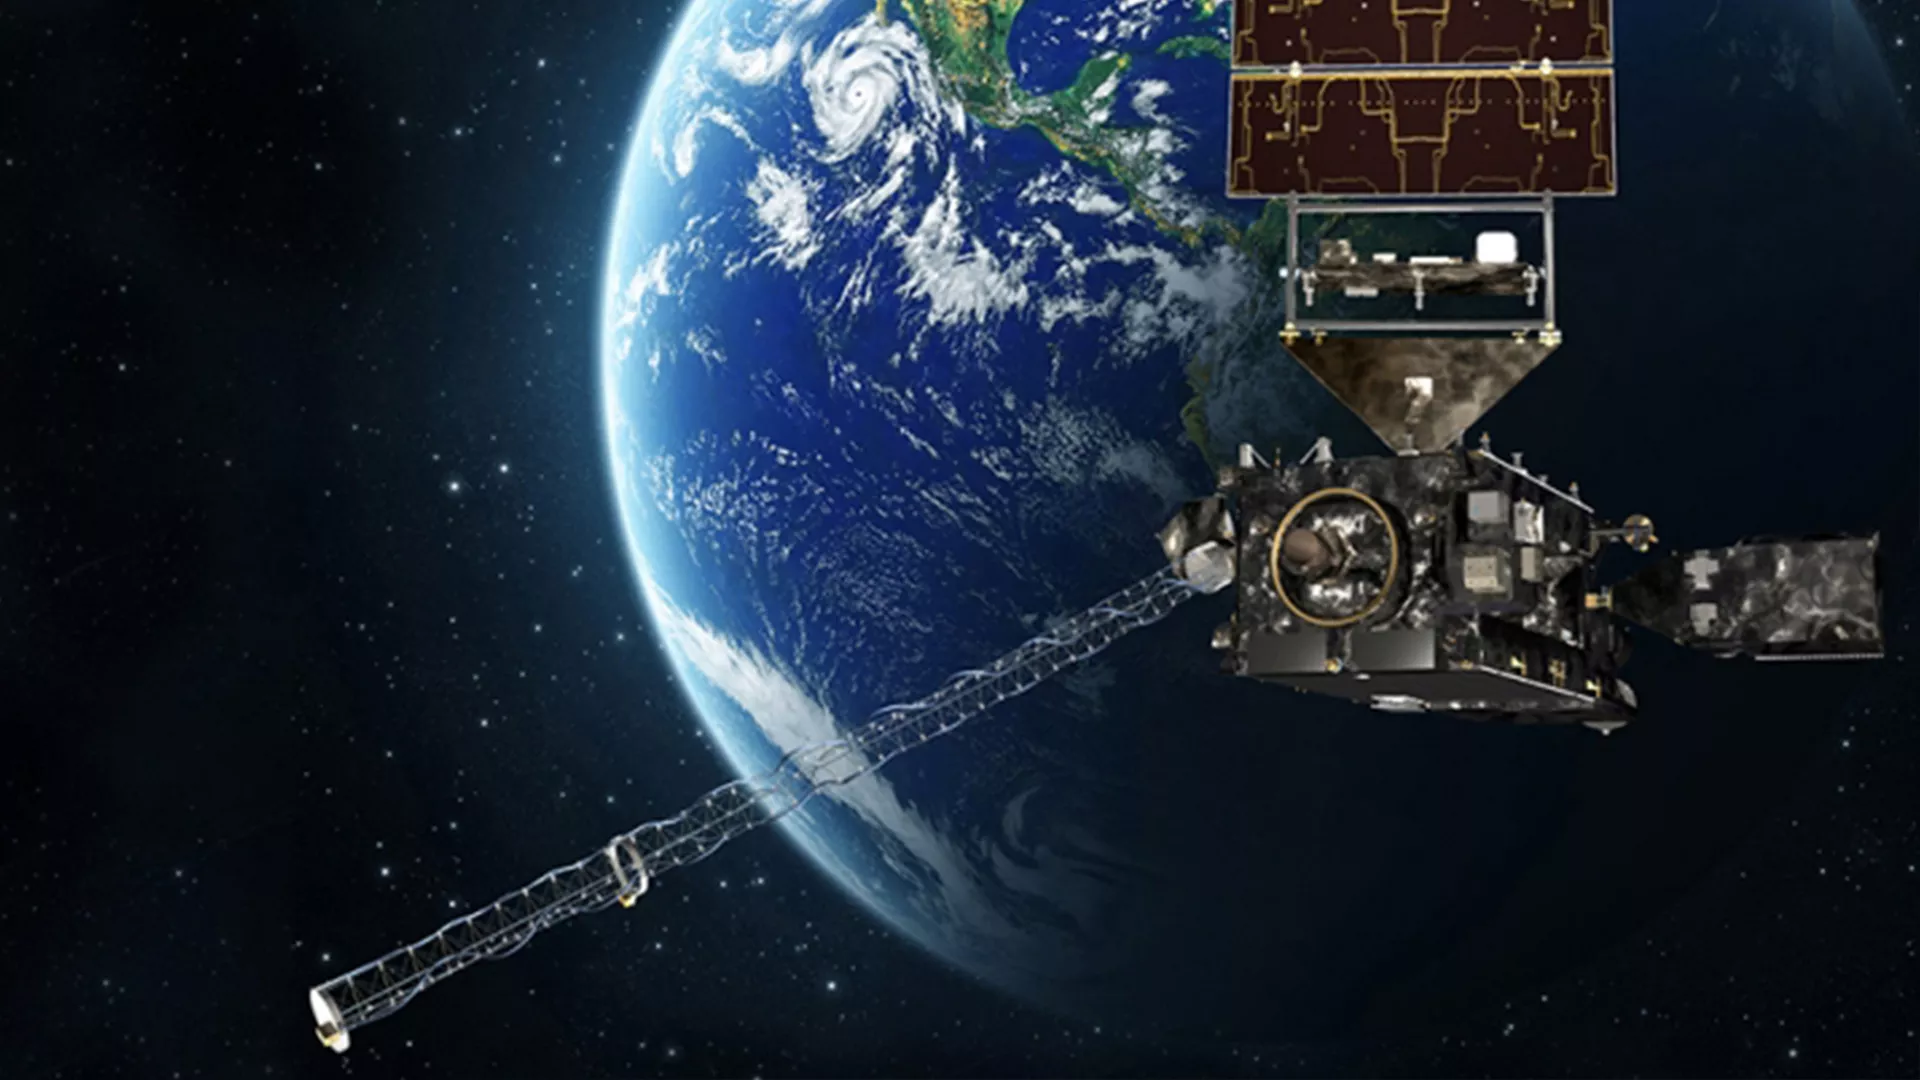 Illustration of GOES-R and earth